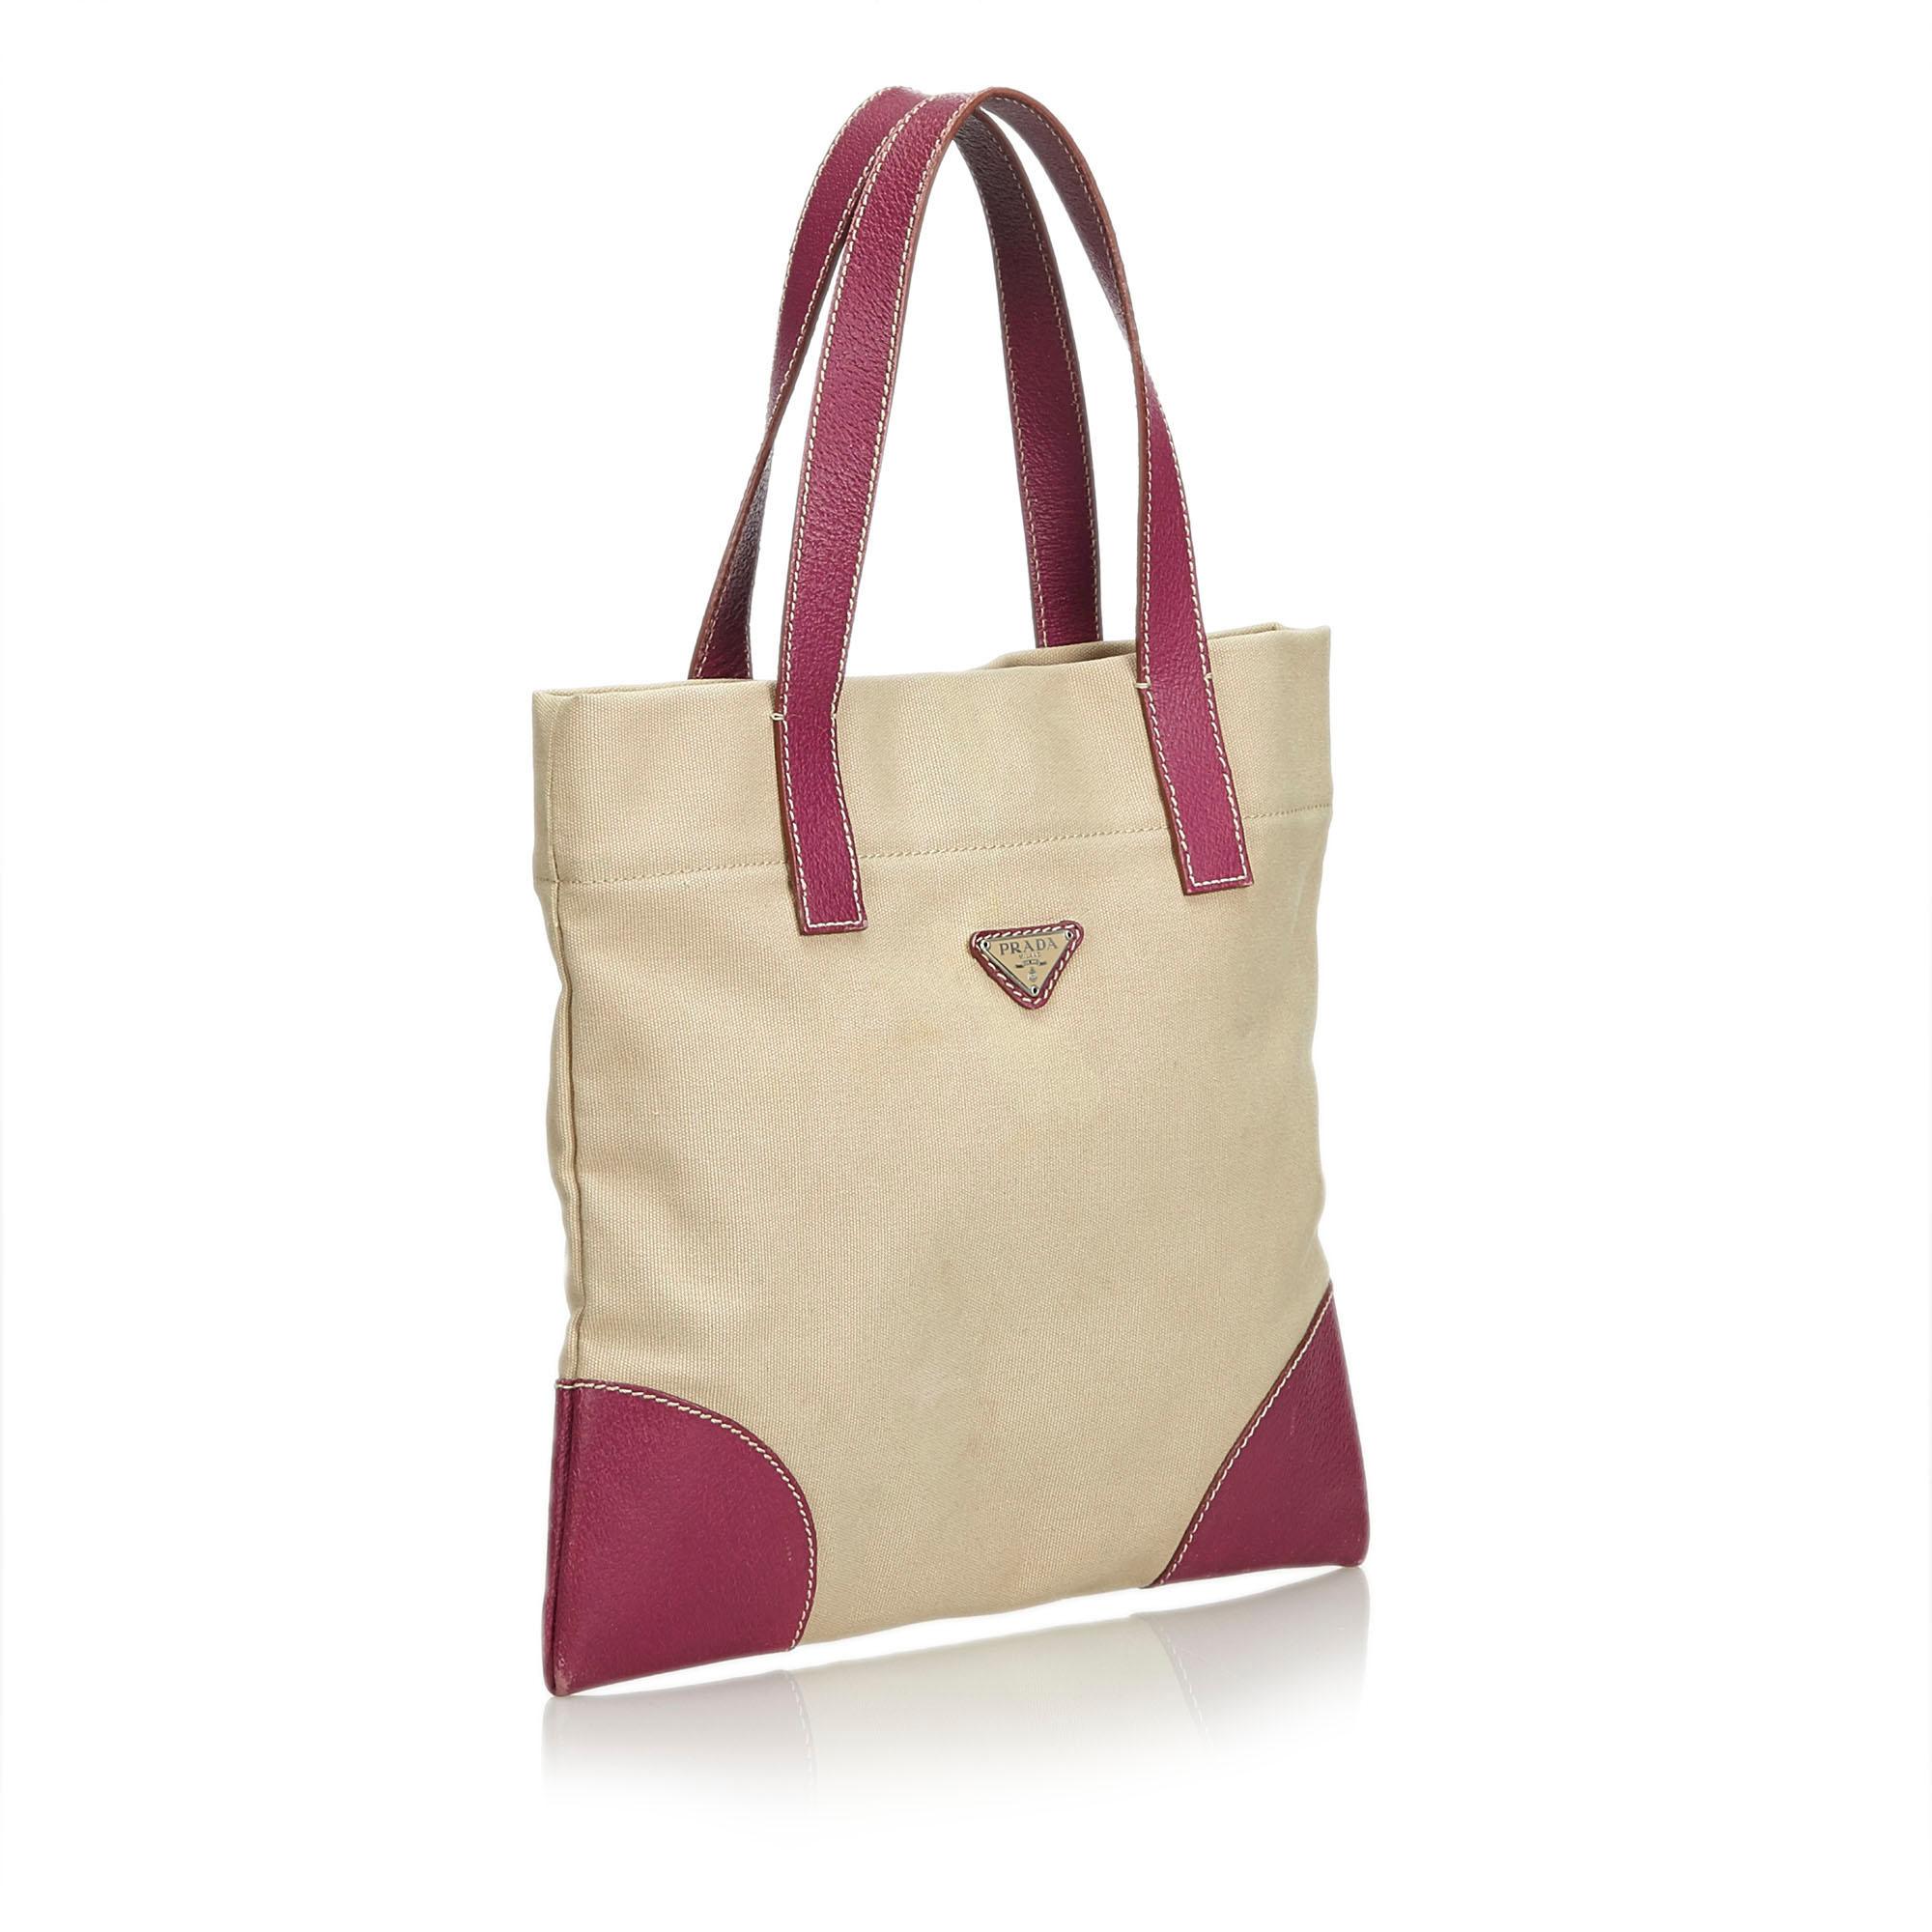 This tote bag features a canvas body with leather trim, flat leather straps, an open top with a magnetic snap button closure, and an interior zip pocket. It carries as B condition rating.

Inclusions: 
This item does not come with